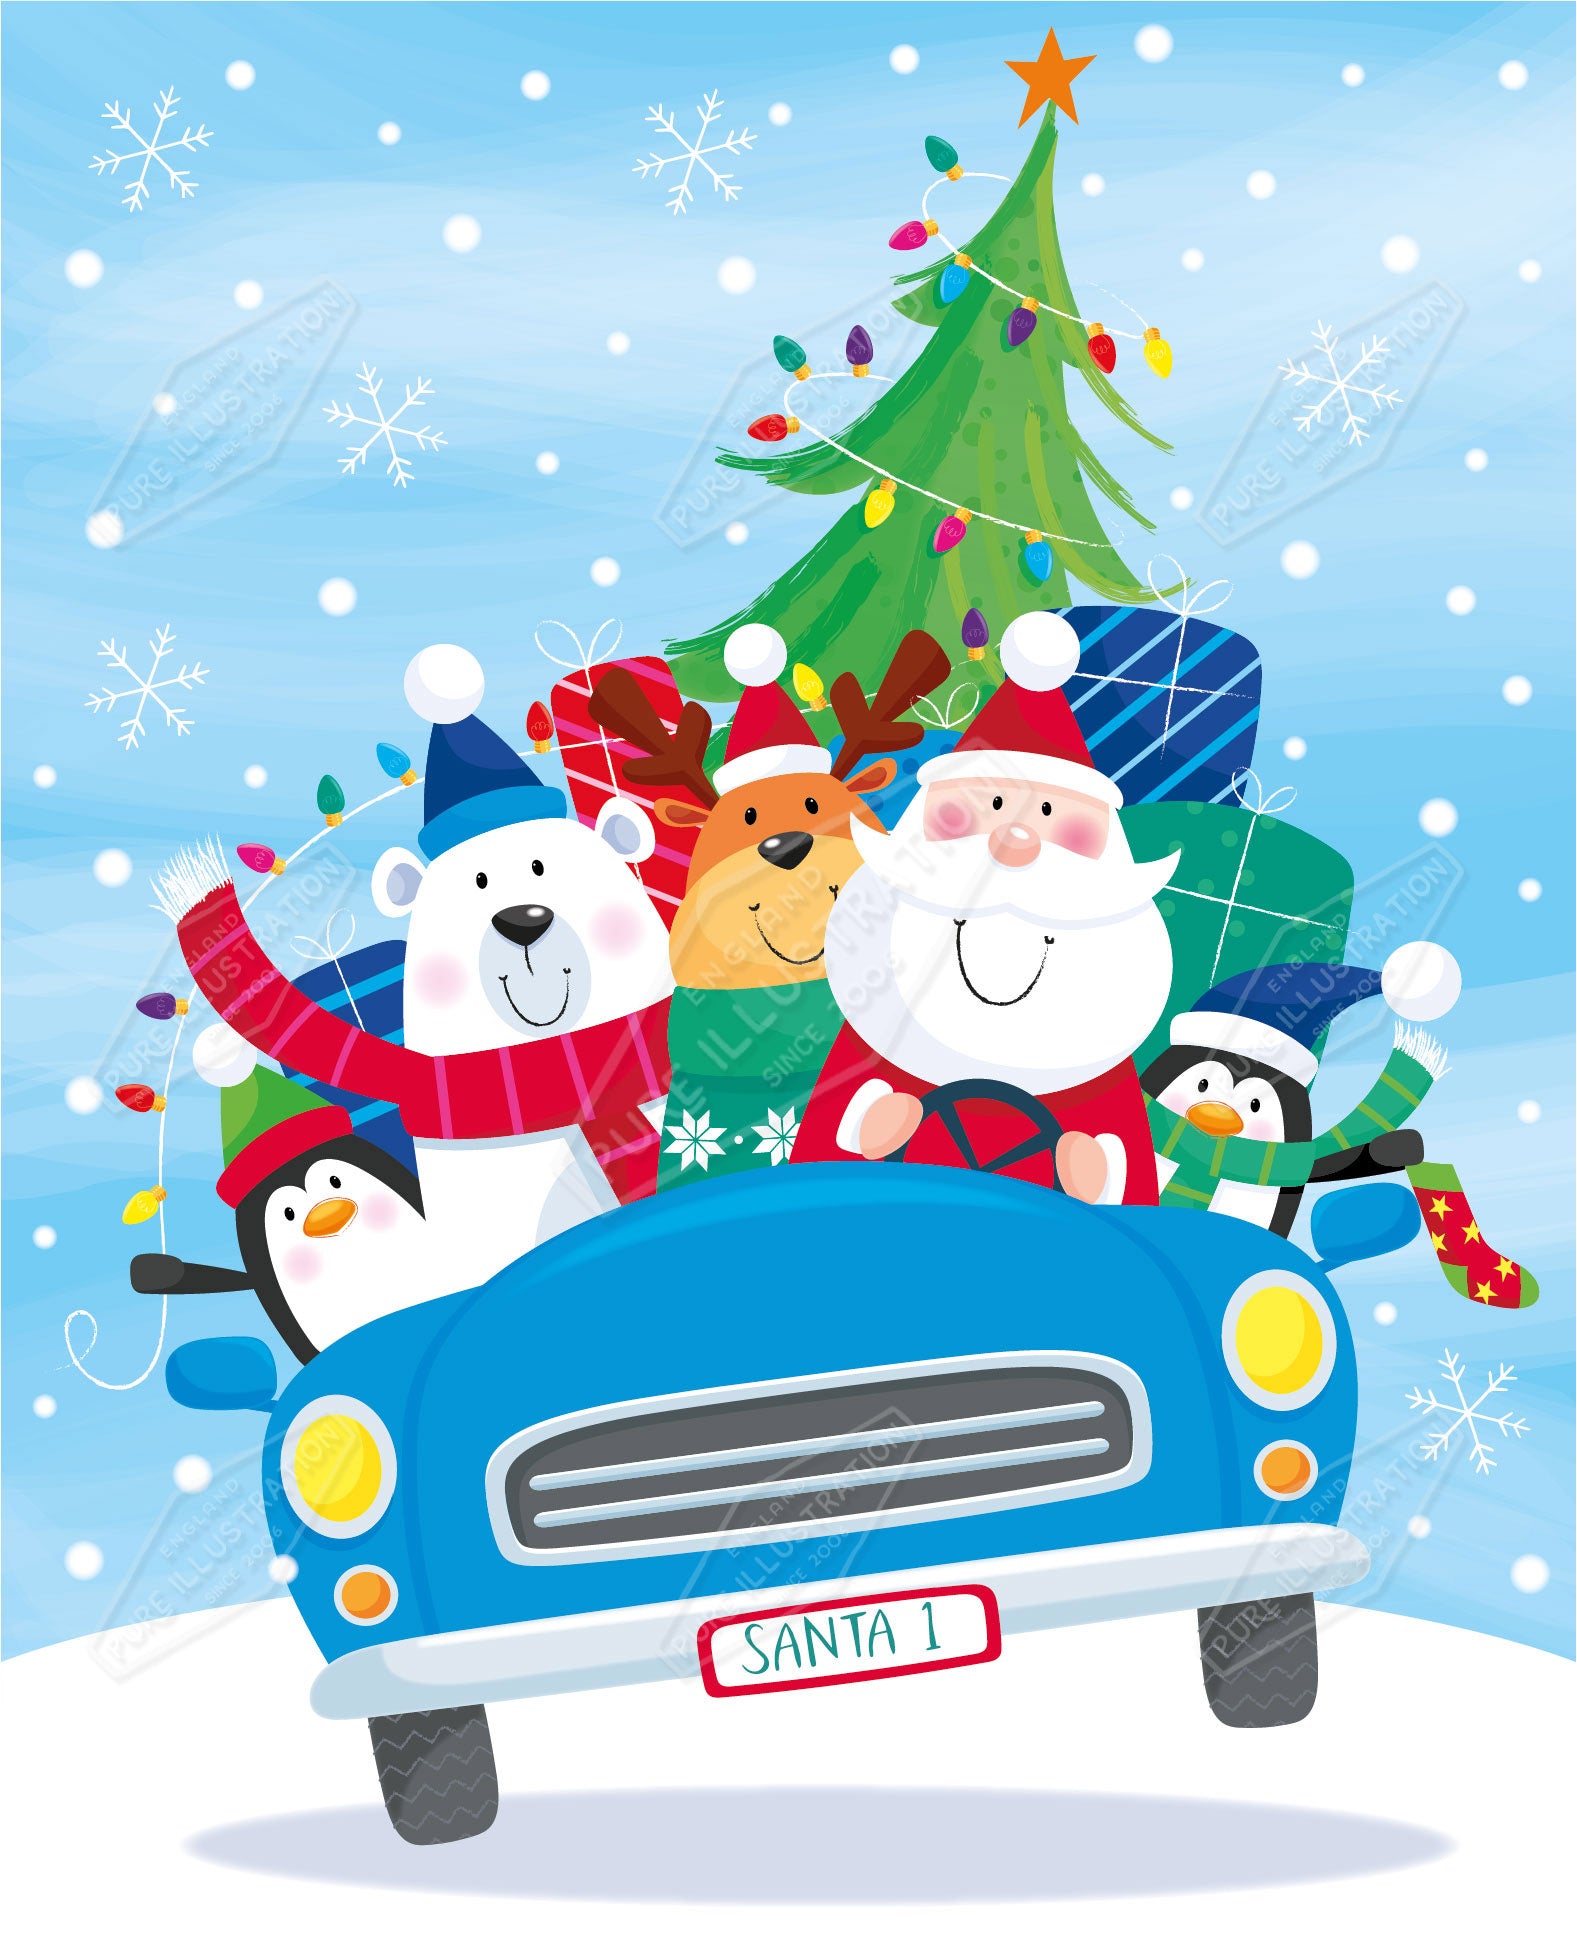 00035579SPI- Sarah Pitt is represented by Pure Art Licensing Agency - Christmas Greeting Card Design